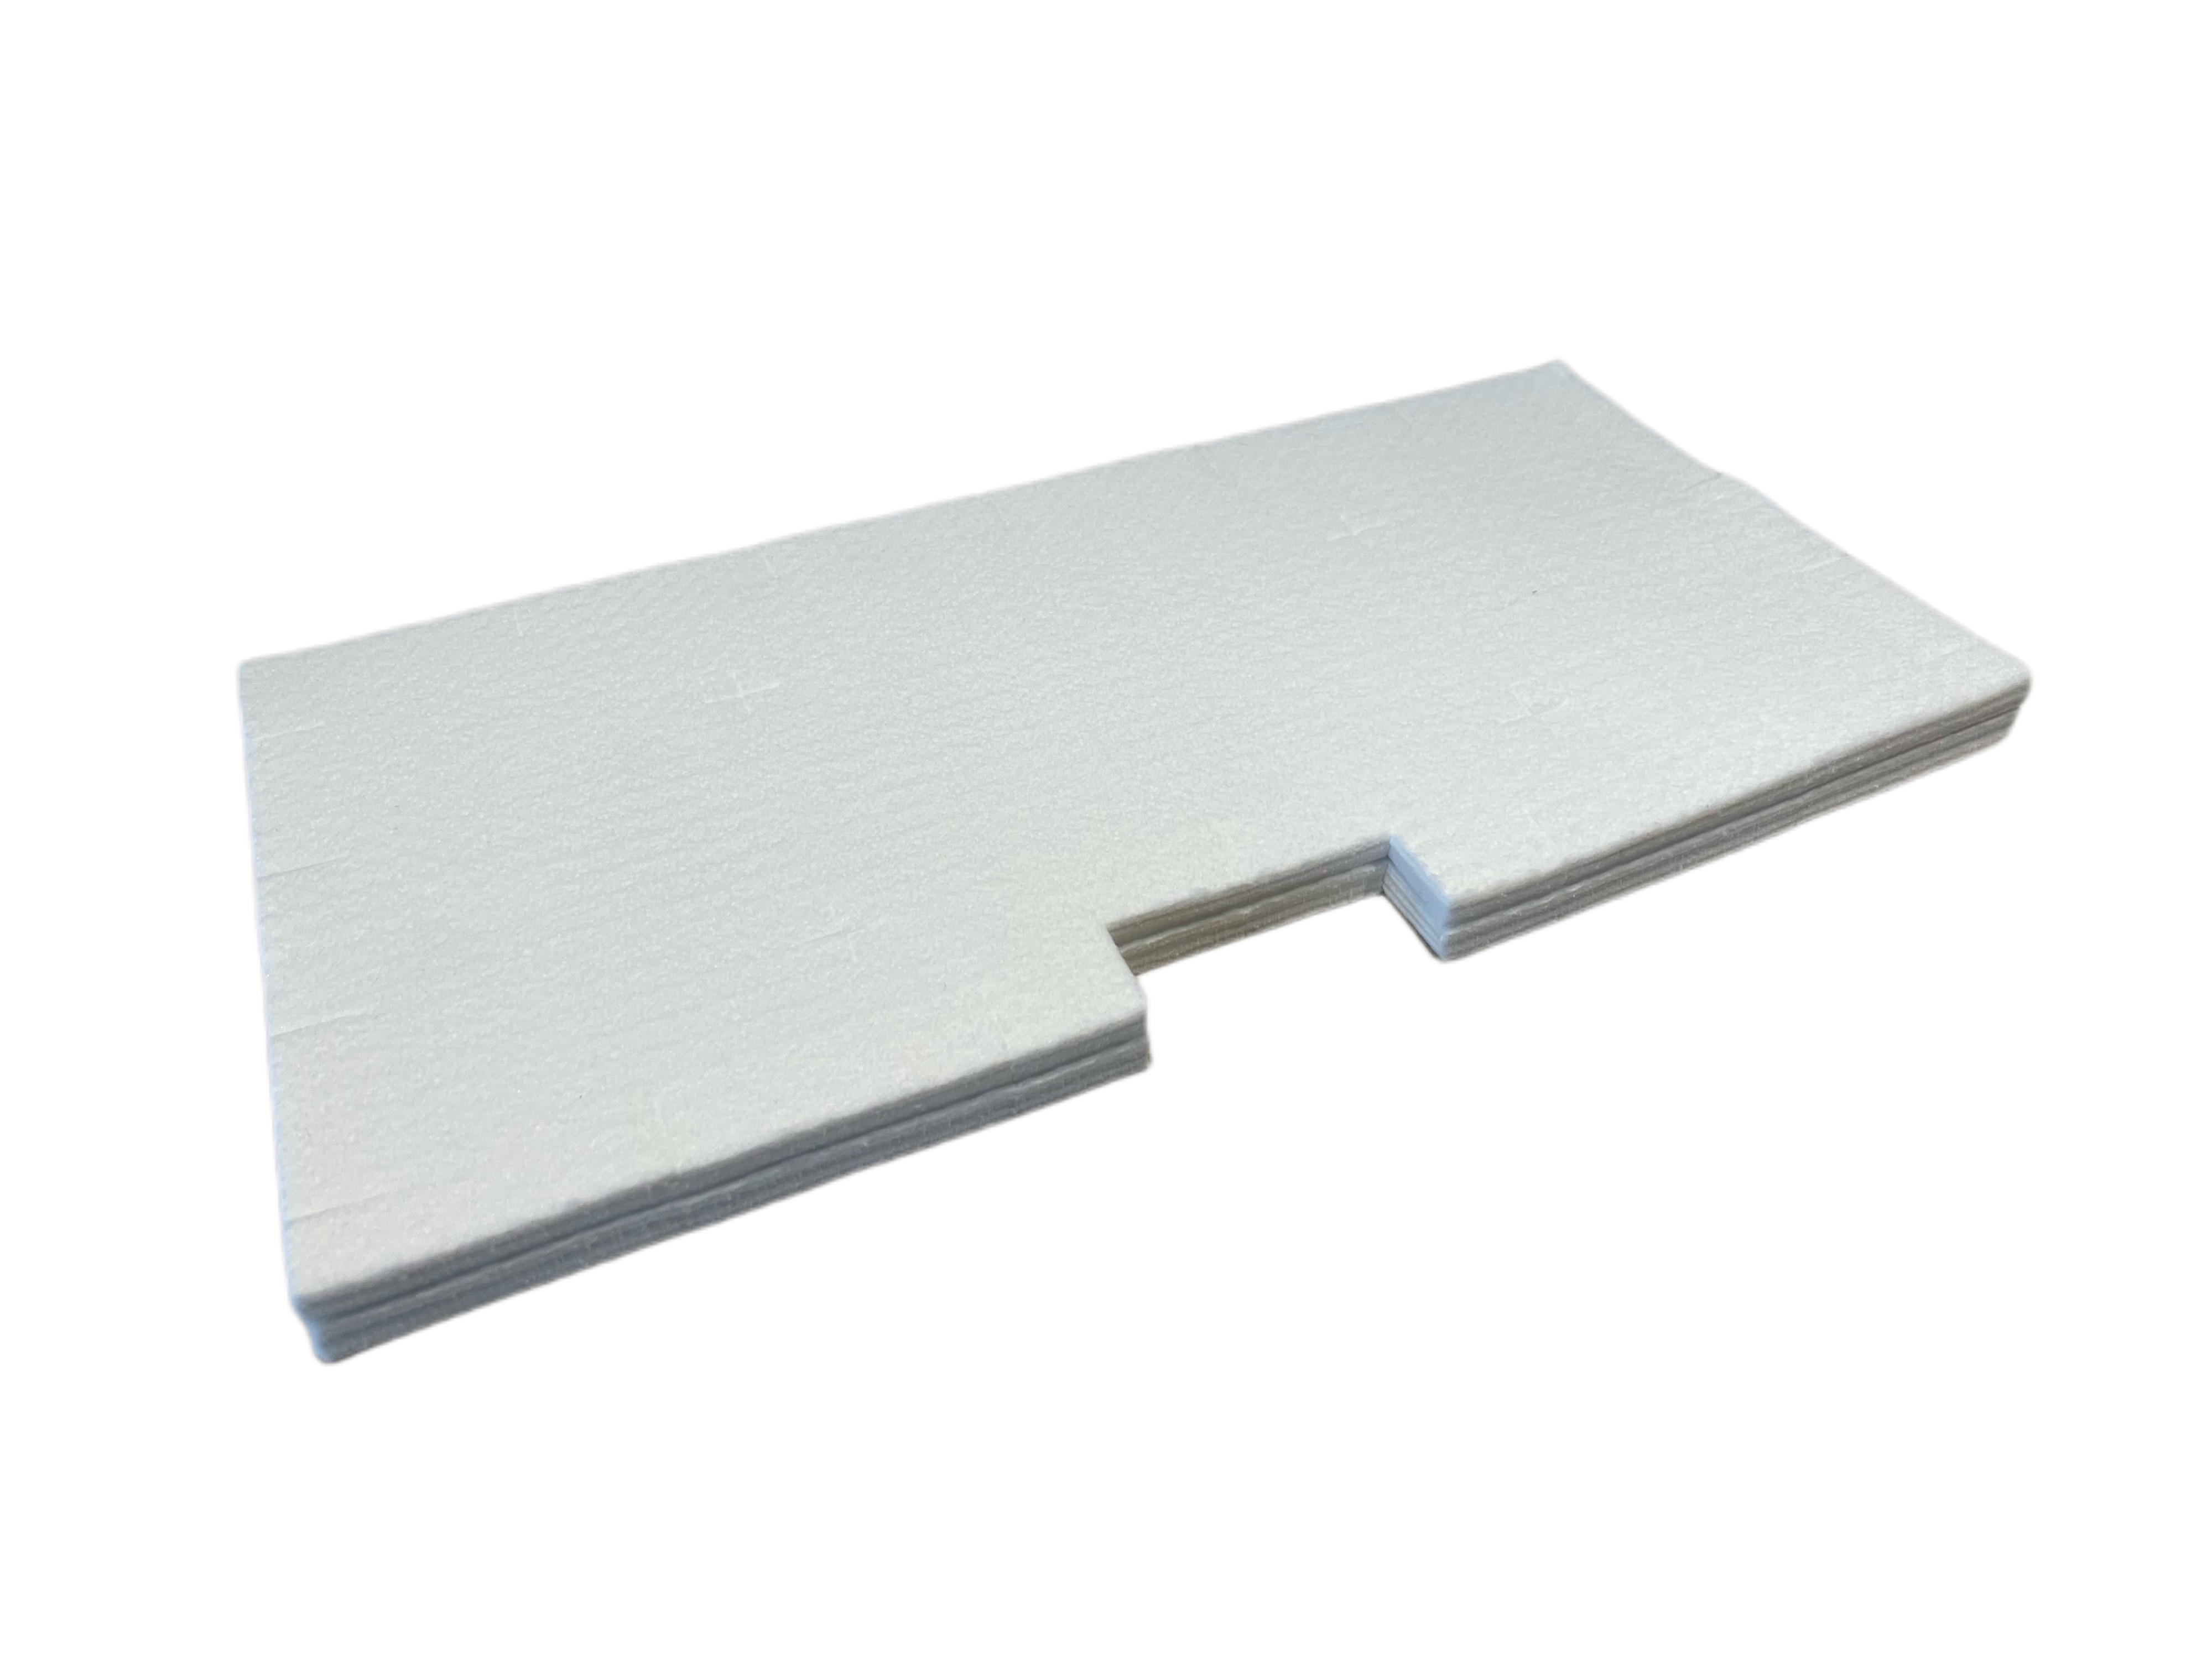 Waste ink tray pad